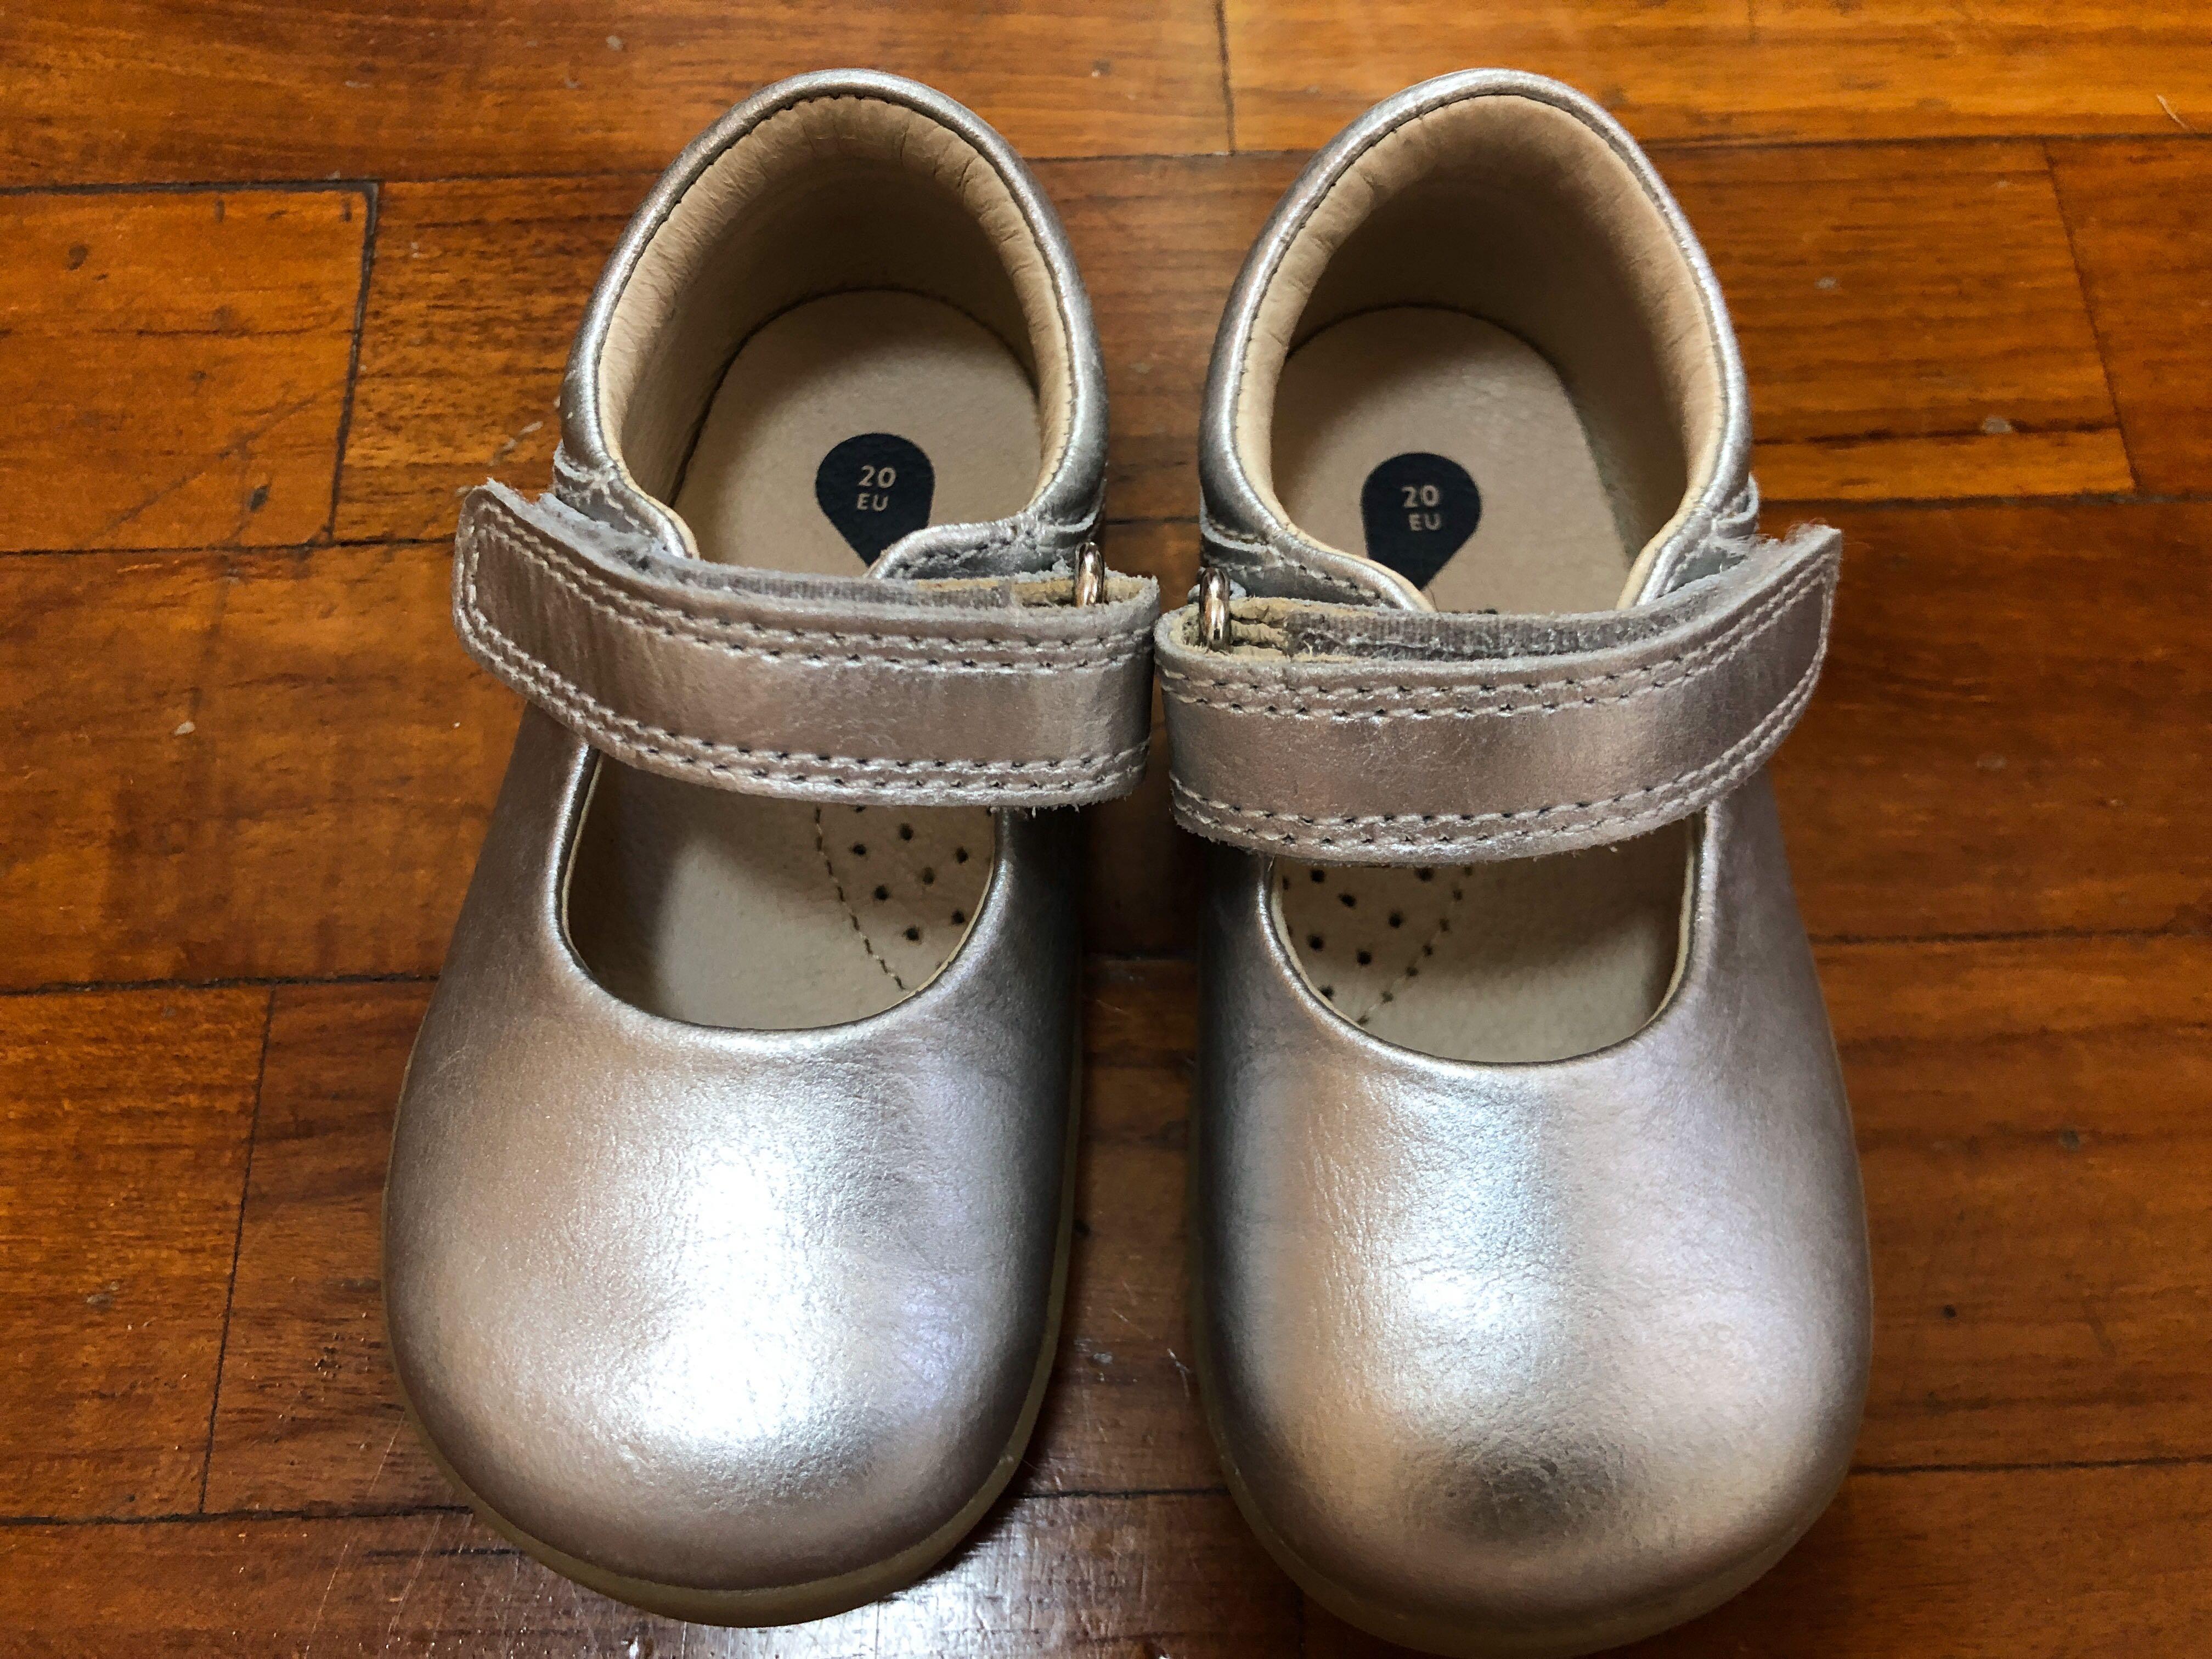 Almost new Bobux baby shoes, Babies 